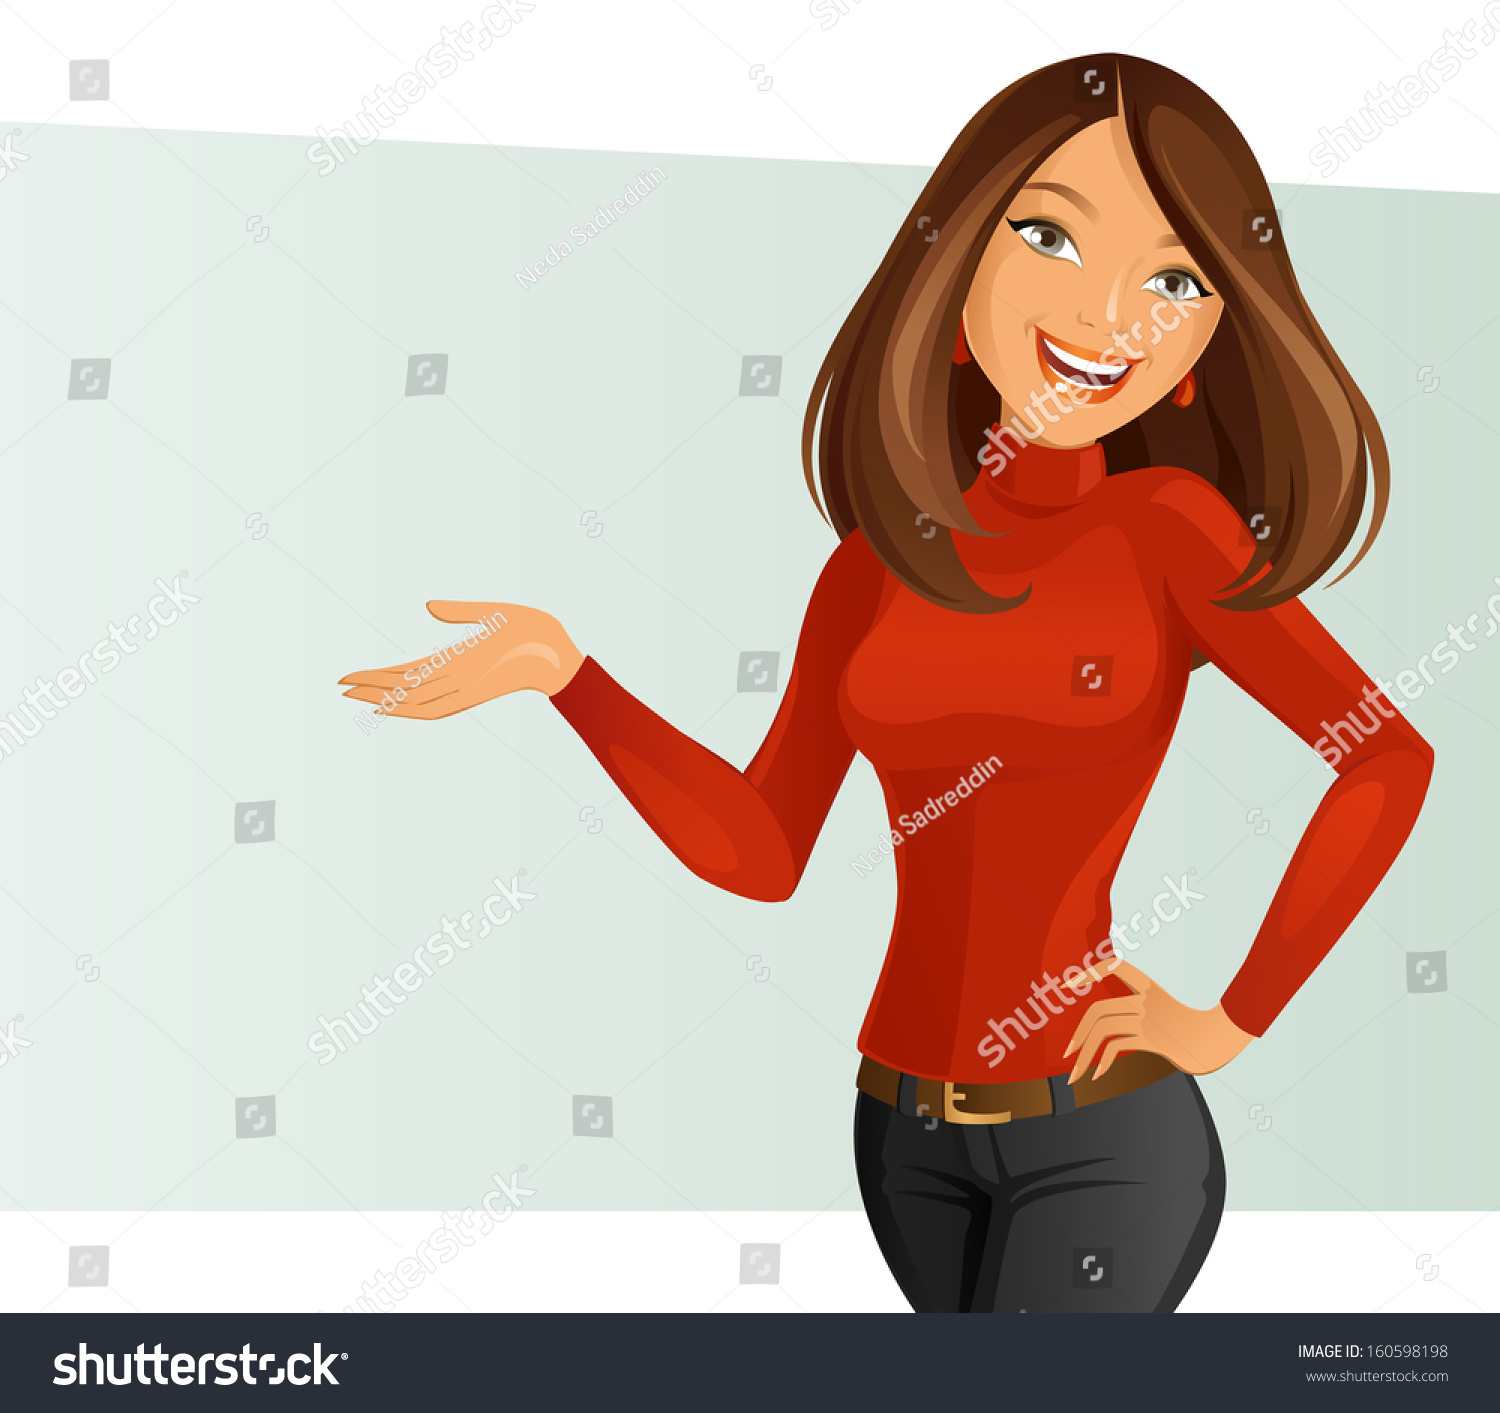 clipart girl smiling - photo #27